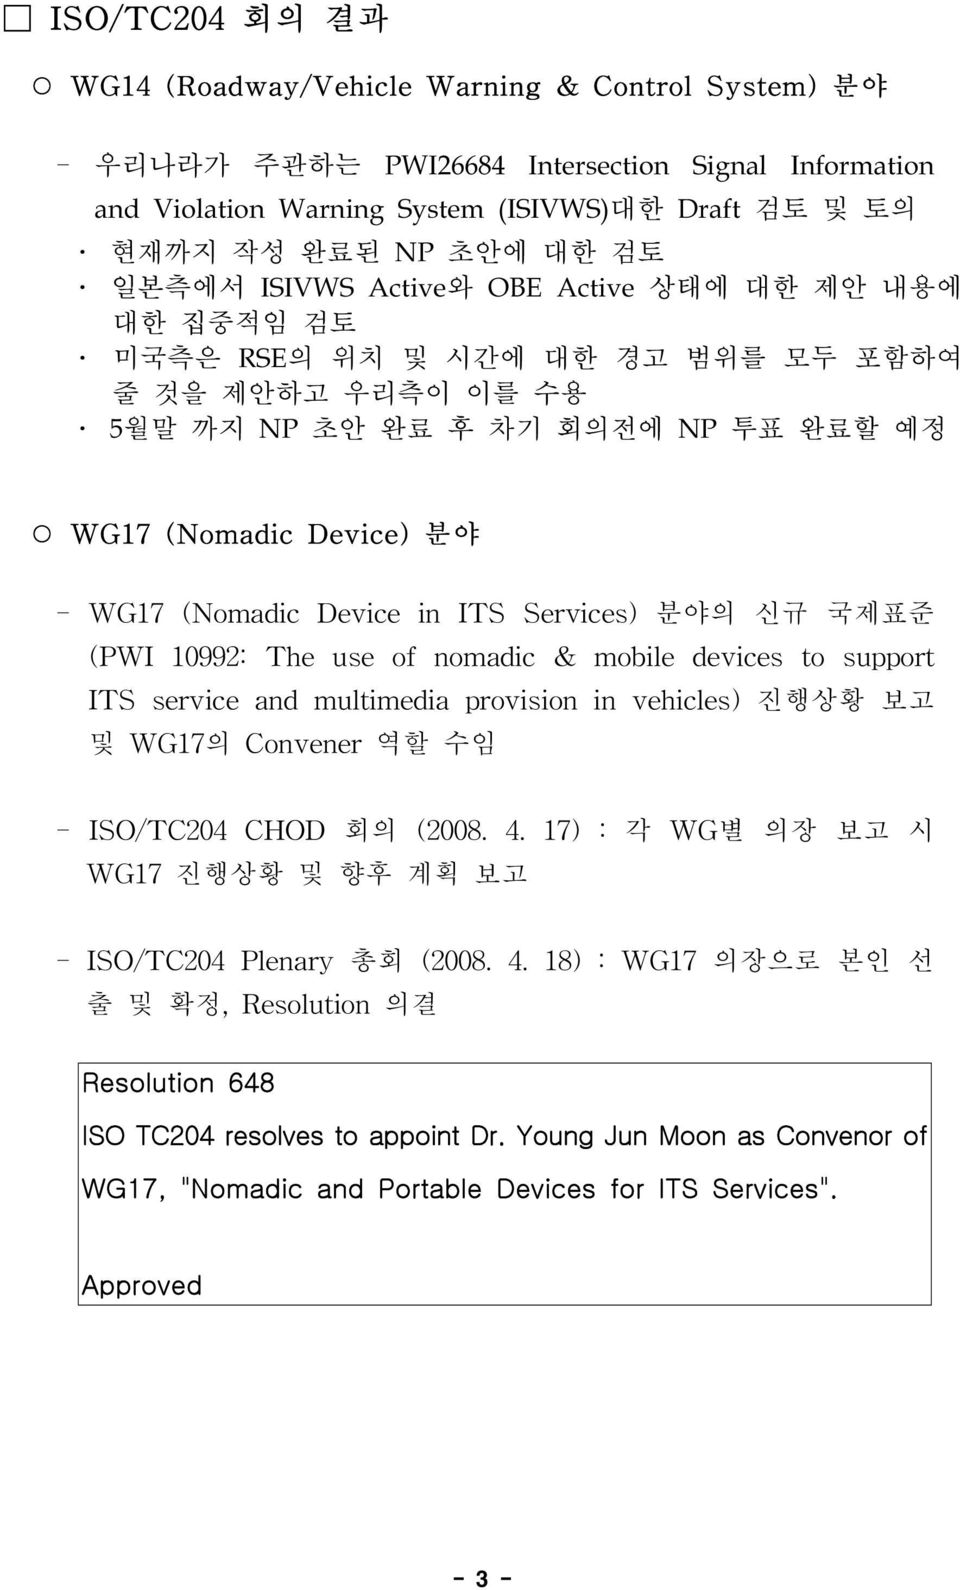 m a d i c D e v i c e ) 분 야 - WG17 (Nomadic Device in ITS Services) 분야의 신규 국제표준 (PWI 10992: The use of nomadic & mobile devices to support ITS service and multimedia provision in vehicles) 진행상황 보고 및